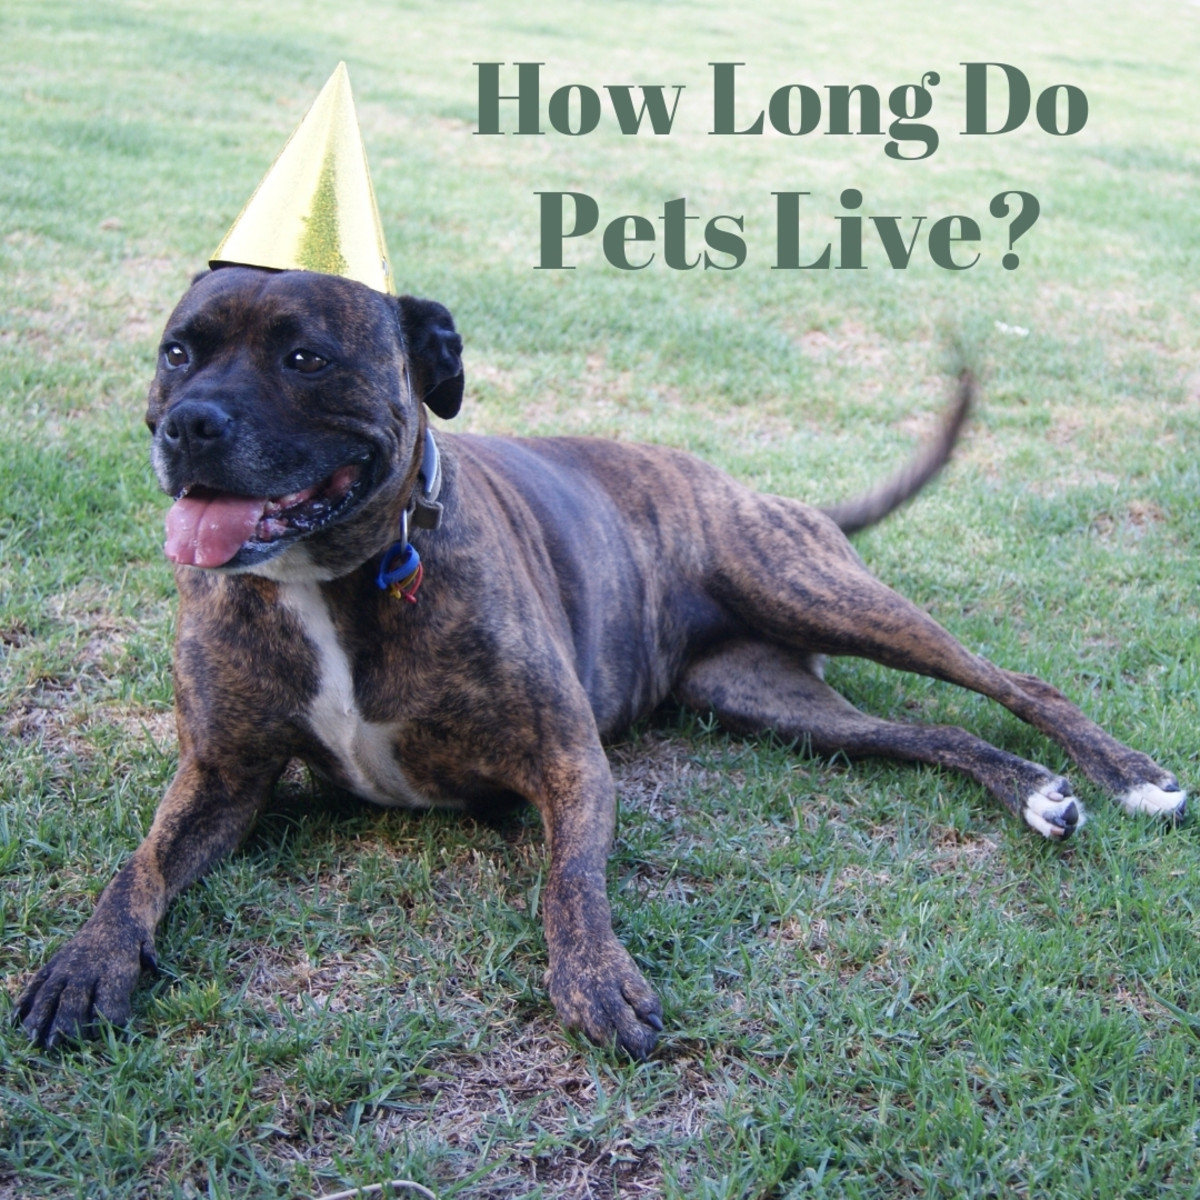 A Pet's Life Expectancy: How Long Will Dogs, Cats, and Other Creatures Live?